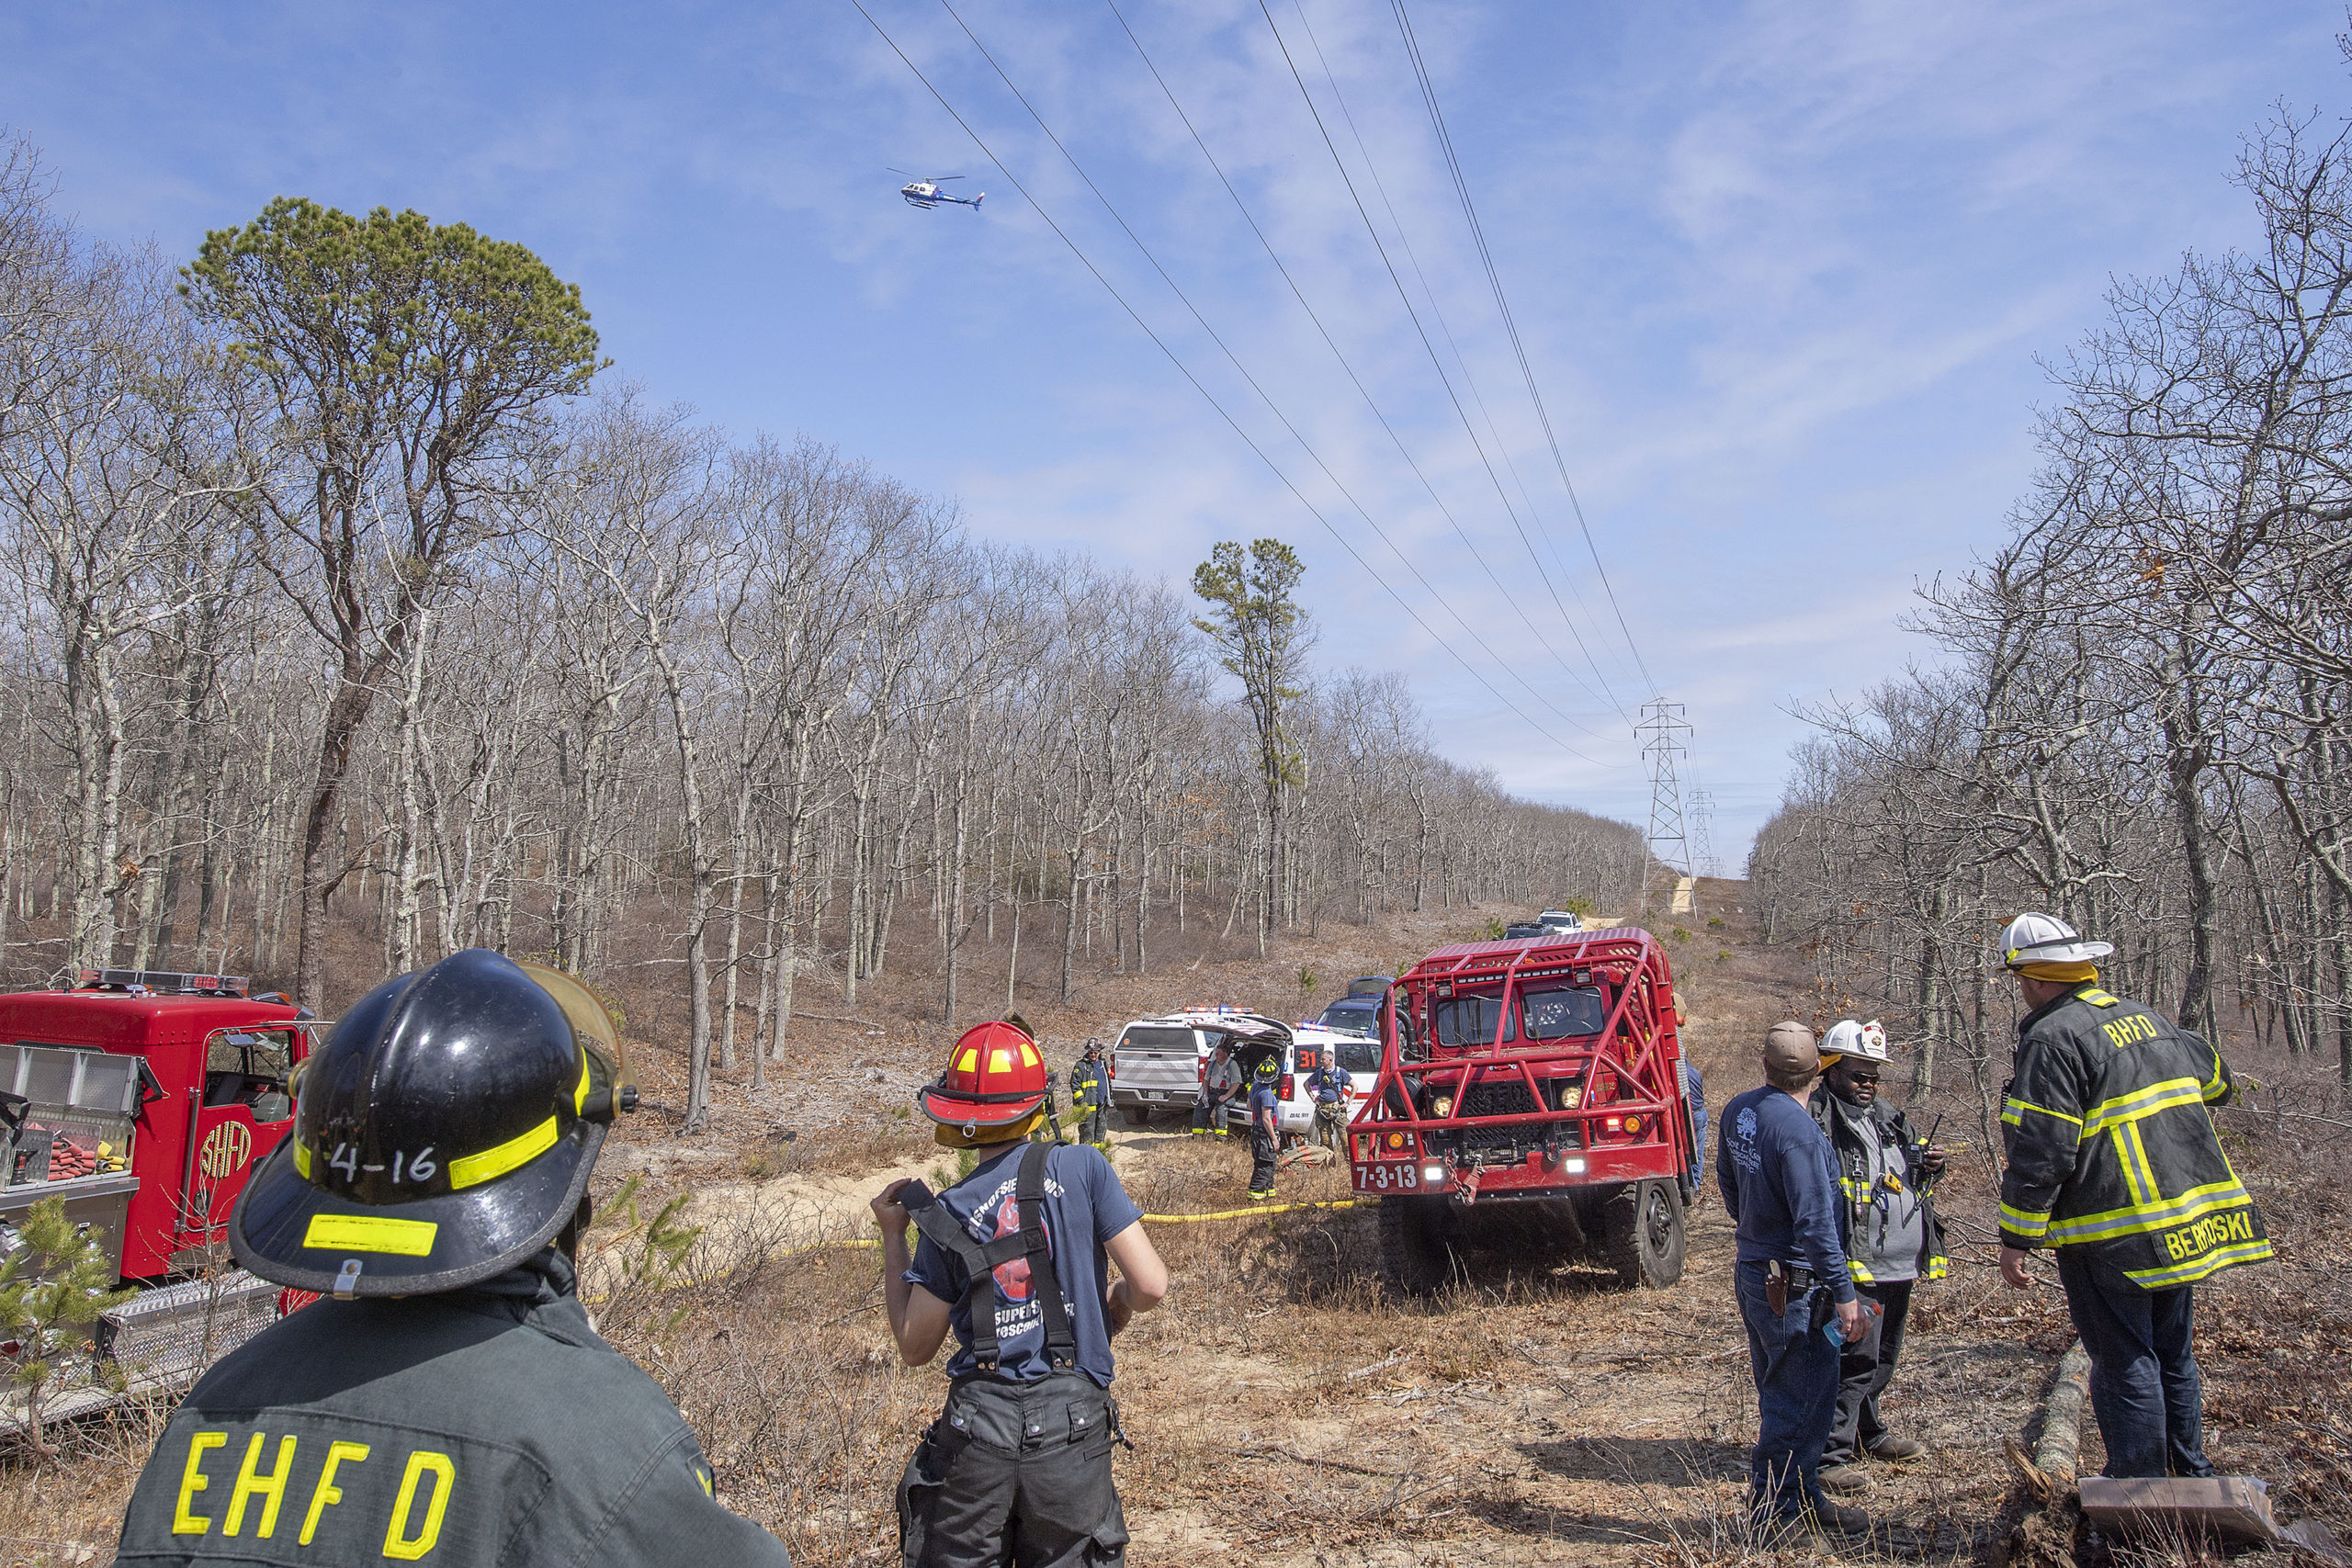 The county's helicopter checked for smoldering hot spots after the fire was out.